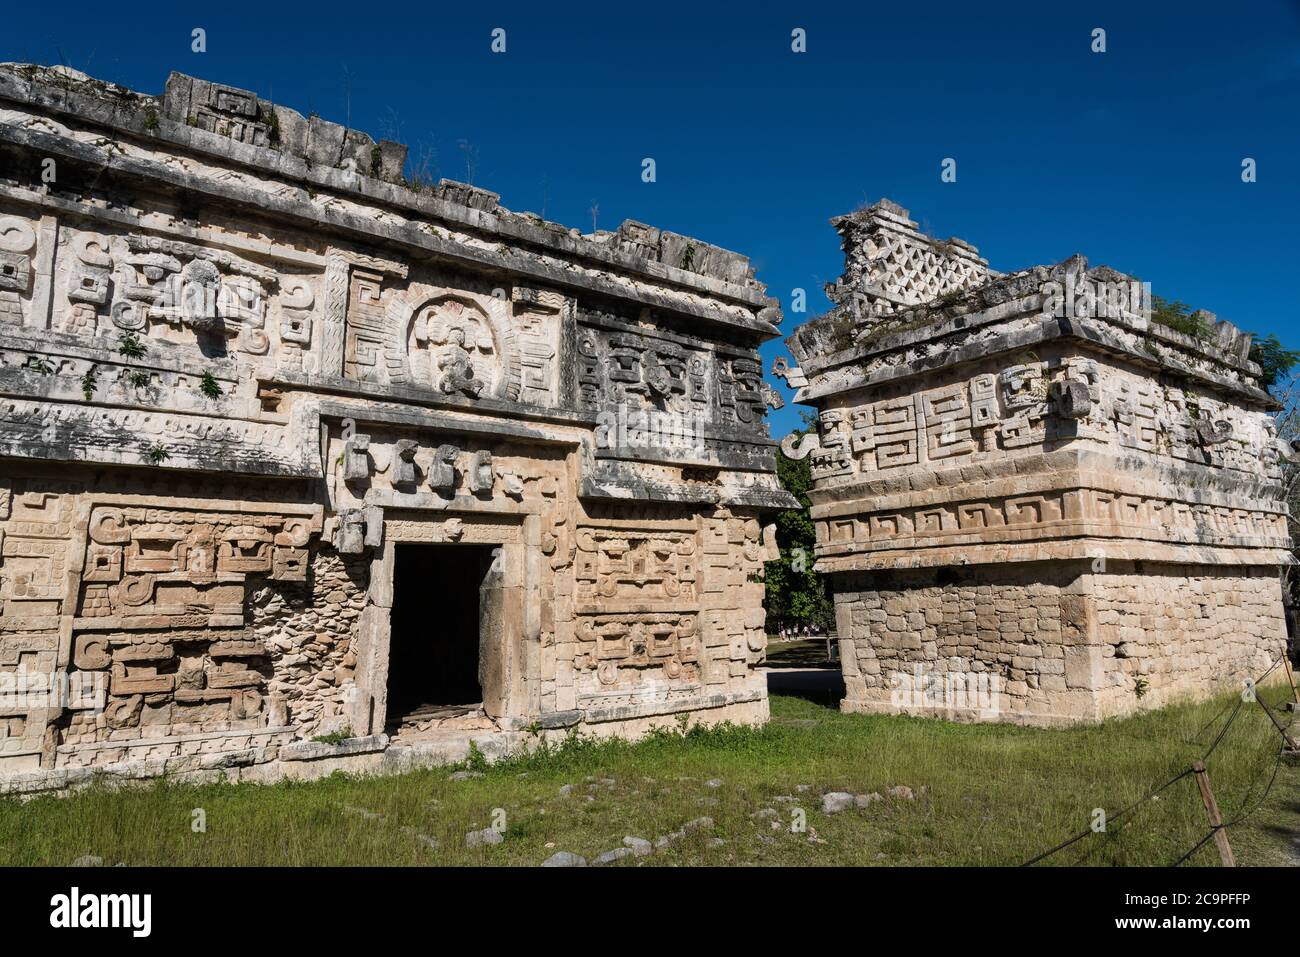 The Nunnery Complex in the ruins of the great Mayan city of Chichen Itza, Yucatan, Mexico.  At right is the Iglesia or Church, built in Chenes style. Stock Photo